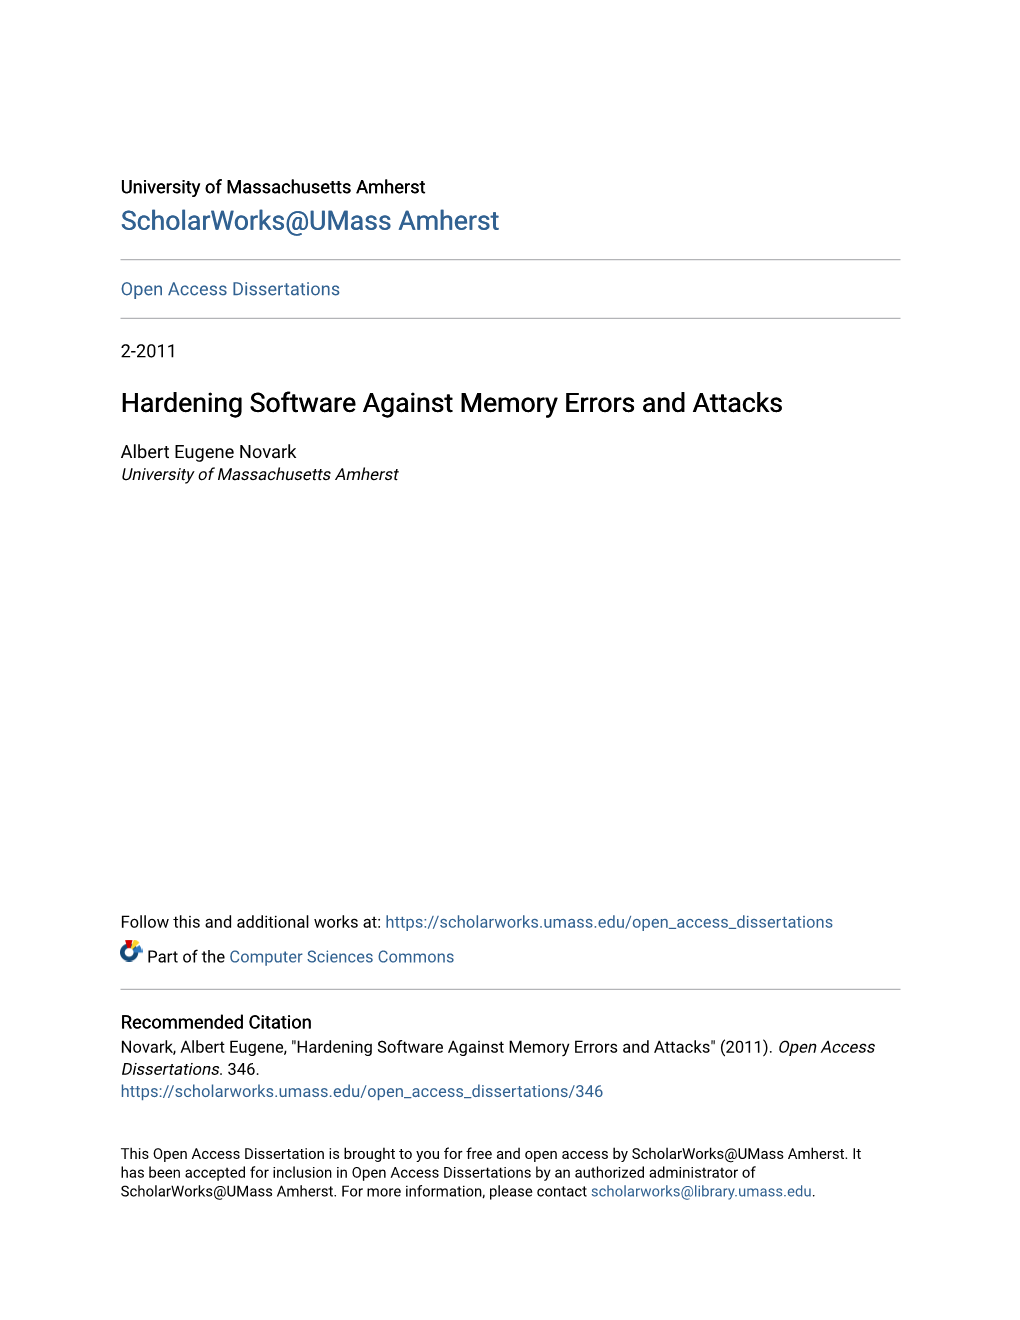 Hardening Software Against Memory Errors and Attacks